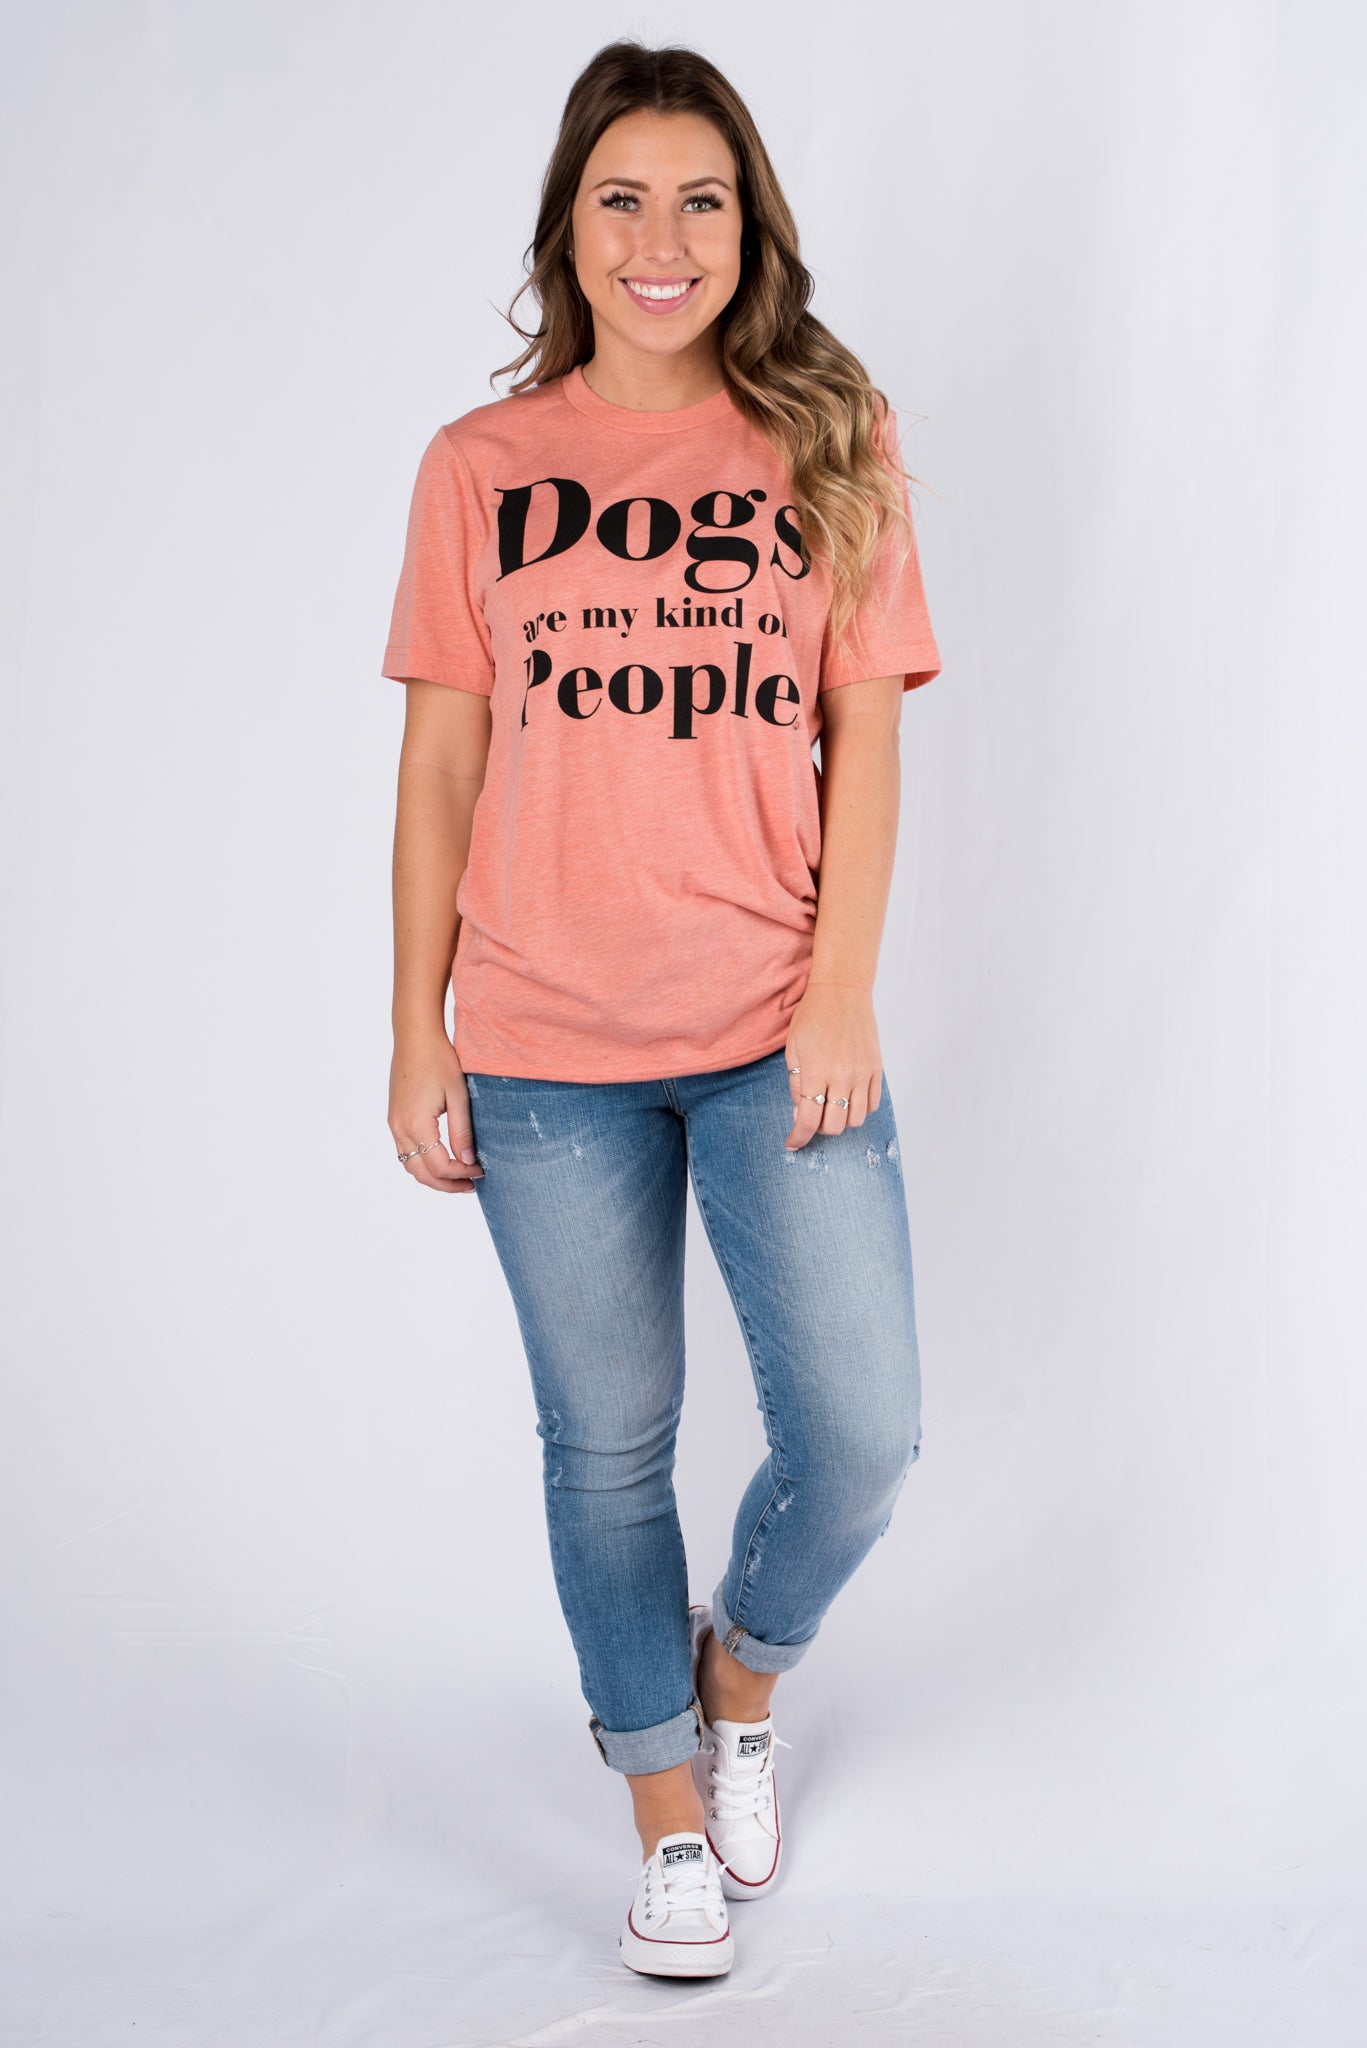 Dogs are my kind of people unisex short sleeve crew neck t-shirt sunset - Trendy T-shirts - Cute Graphic Tee Fashion at Lush Fashion Lounge Boutique in Oklahoma